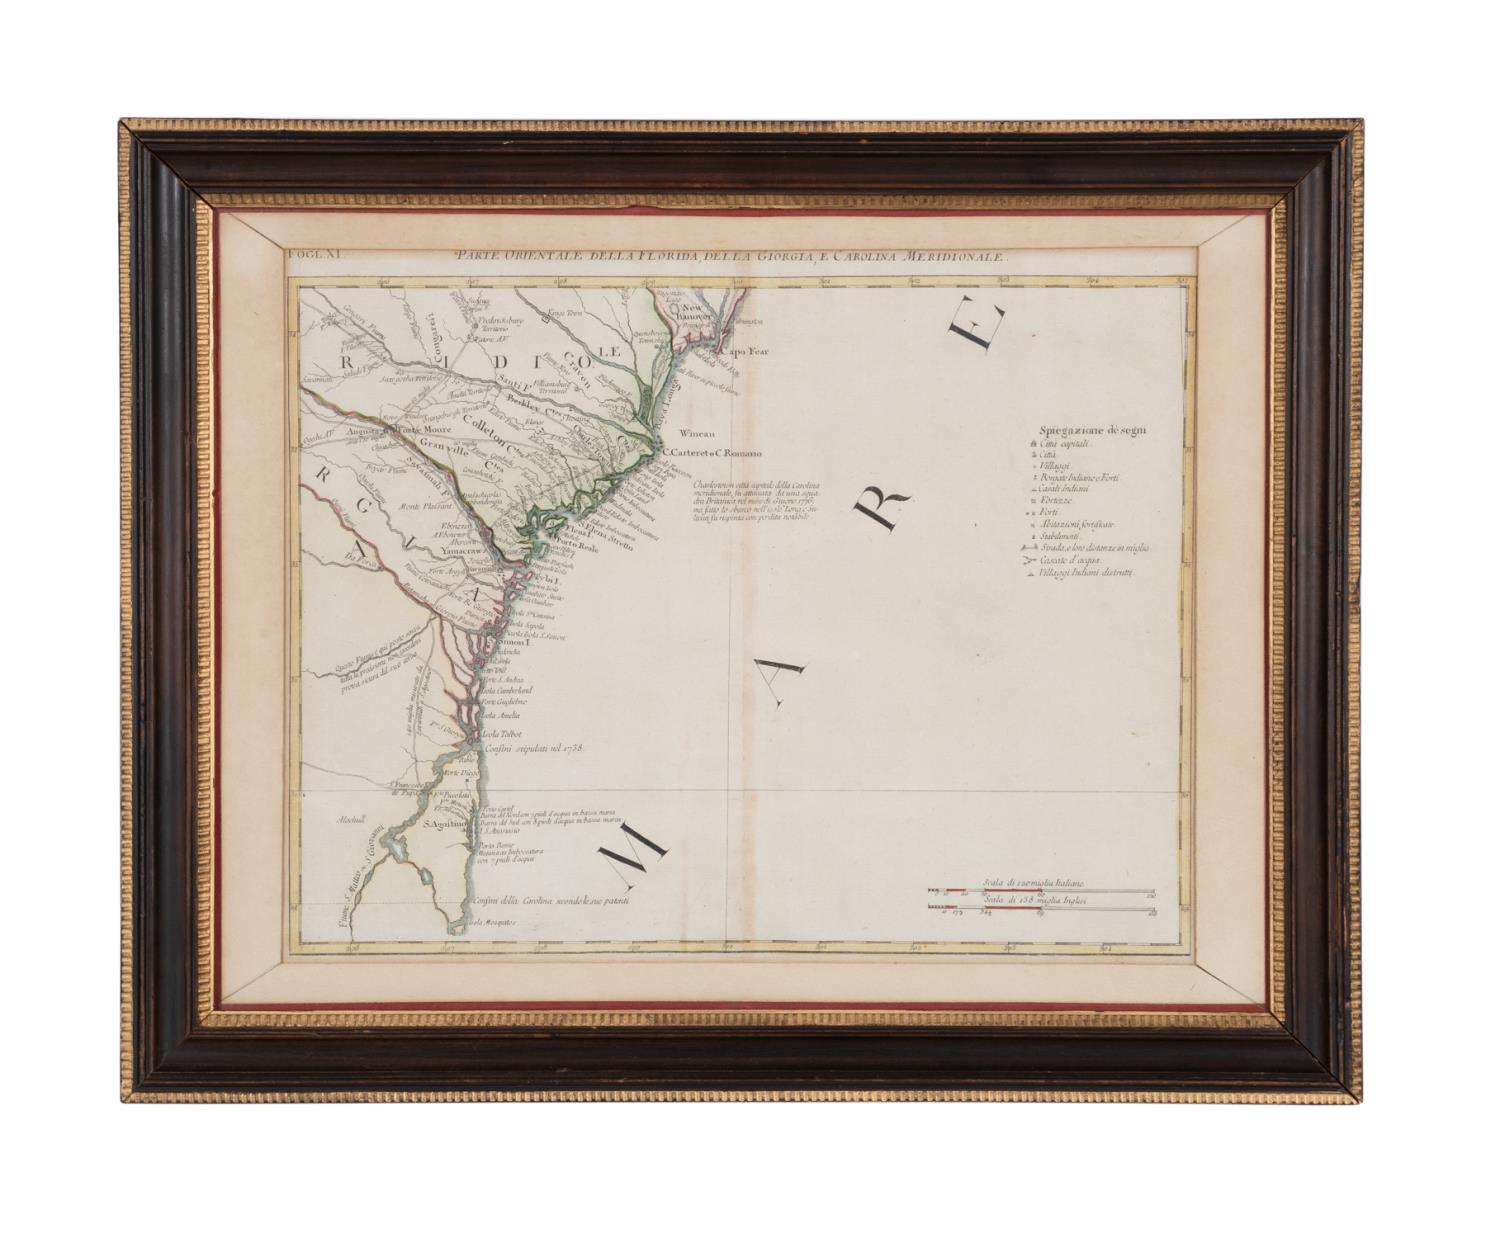 LATE. 18TH C. PARTIAL MAP OF THE